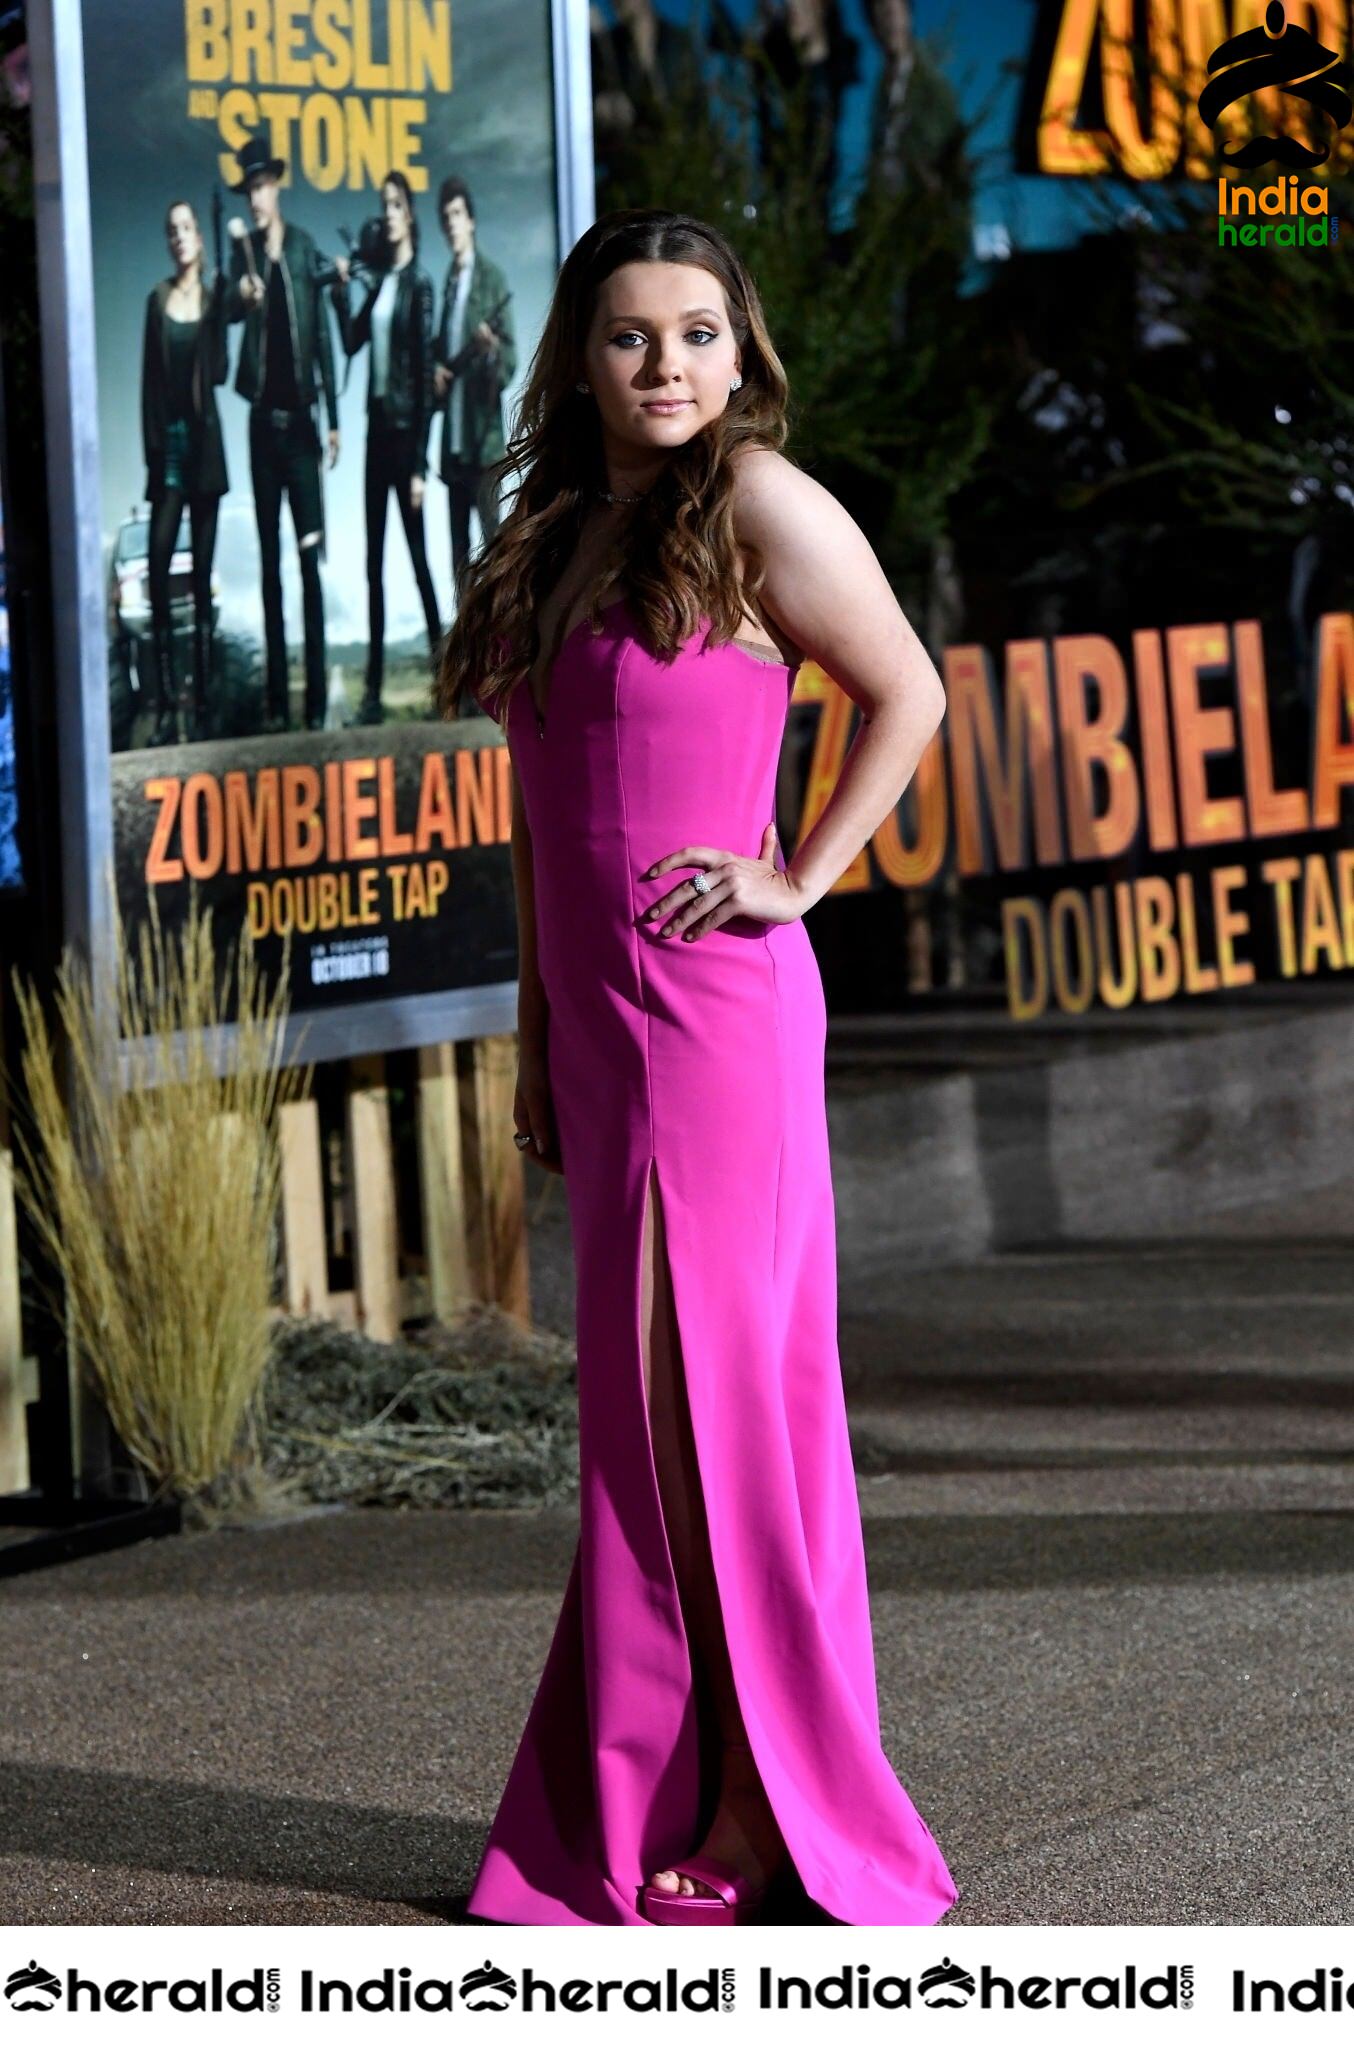 Abigail Breslin at Zombieland Double Tap Premiere in Westwood CA Set 3